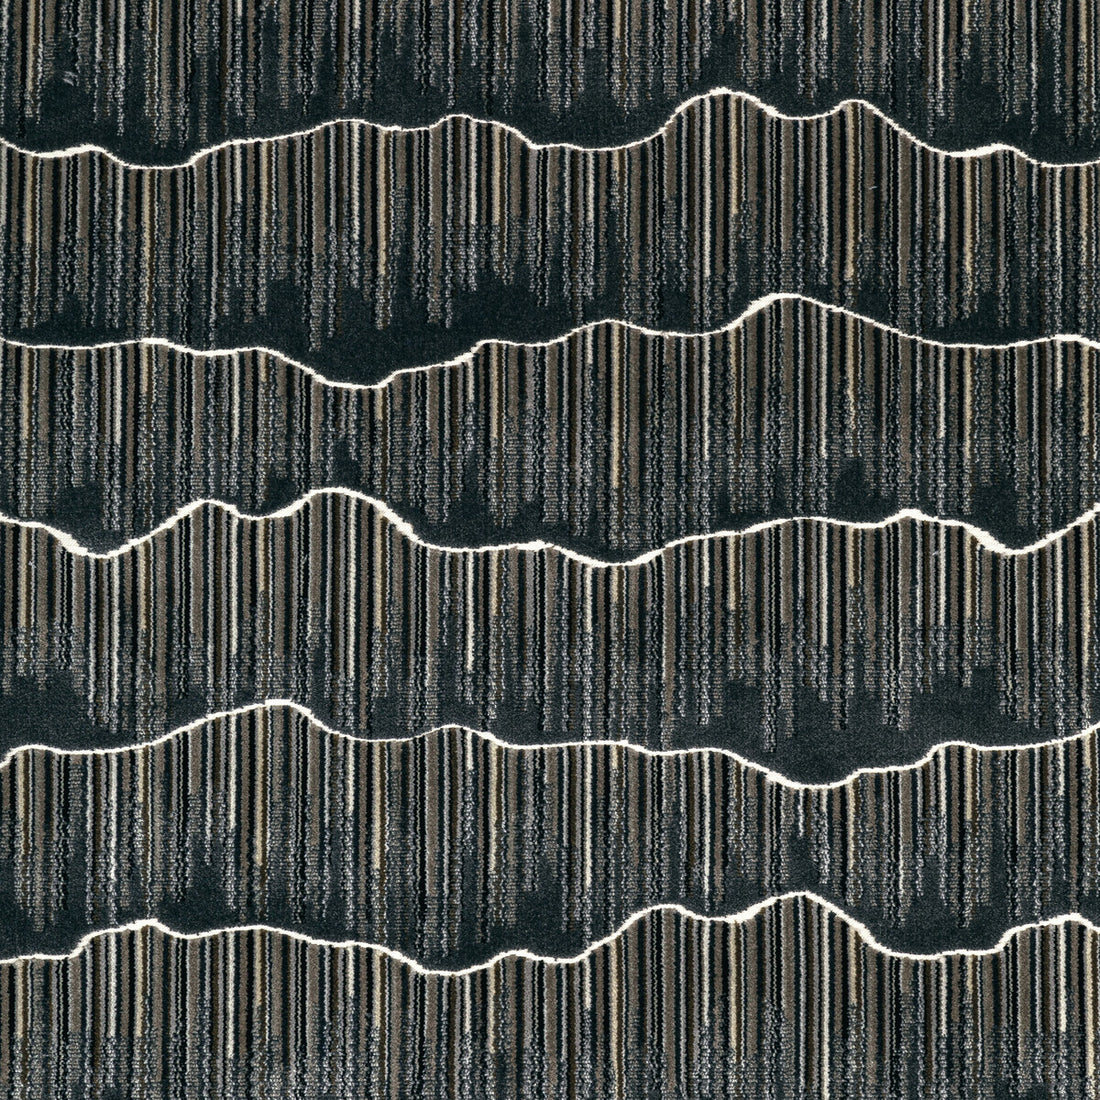 Mountainscape fabric in noir color - pattern 36350.821.0 - by Kravet Couture in the Modern Luxe III collection